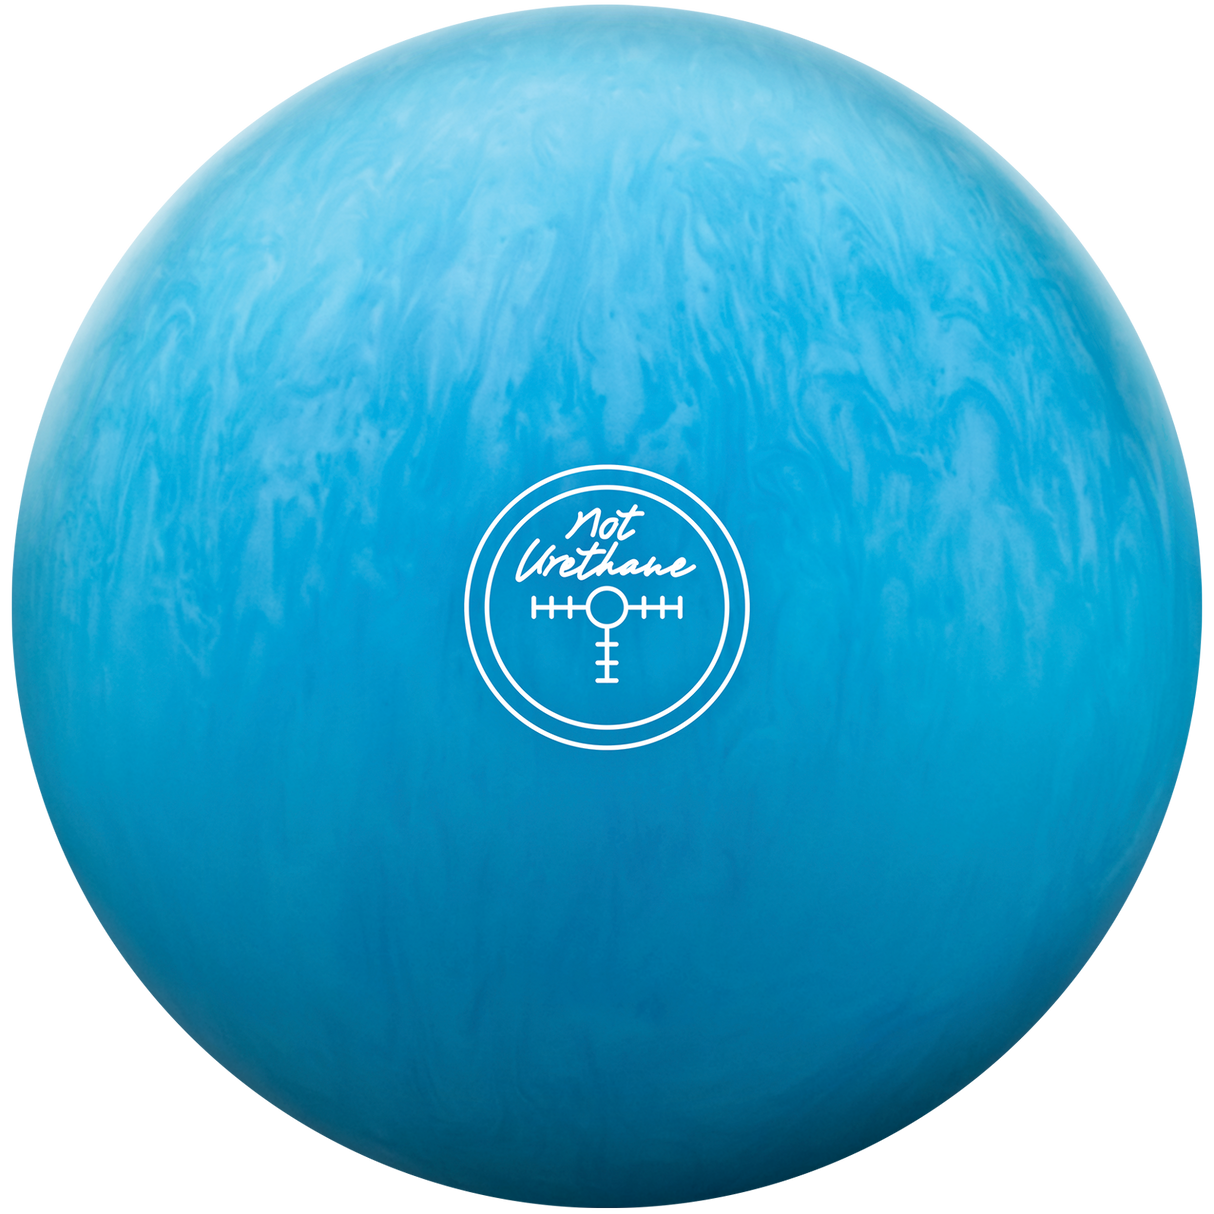 hammer-nu-blue-hammer bowling ball. Inside Bowling powered by Ray Orf's Pro Shop in St. Louis, Missouri USA best prices online. Free shipping on orders over $75.